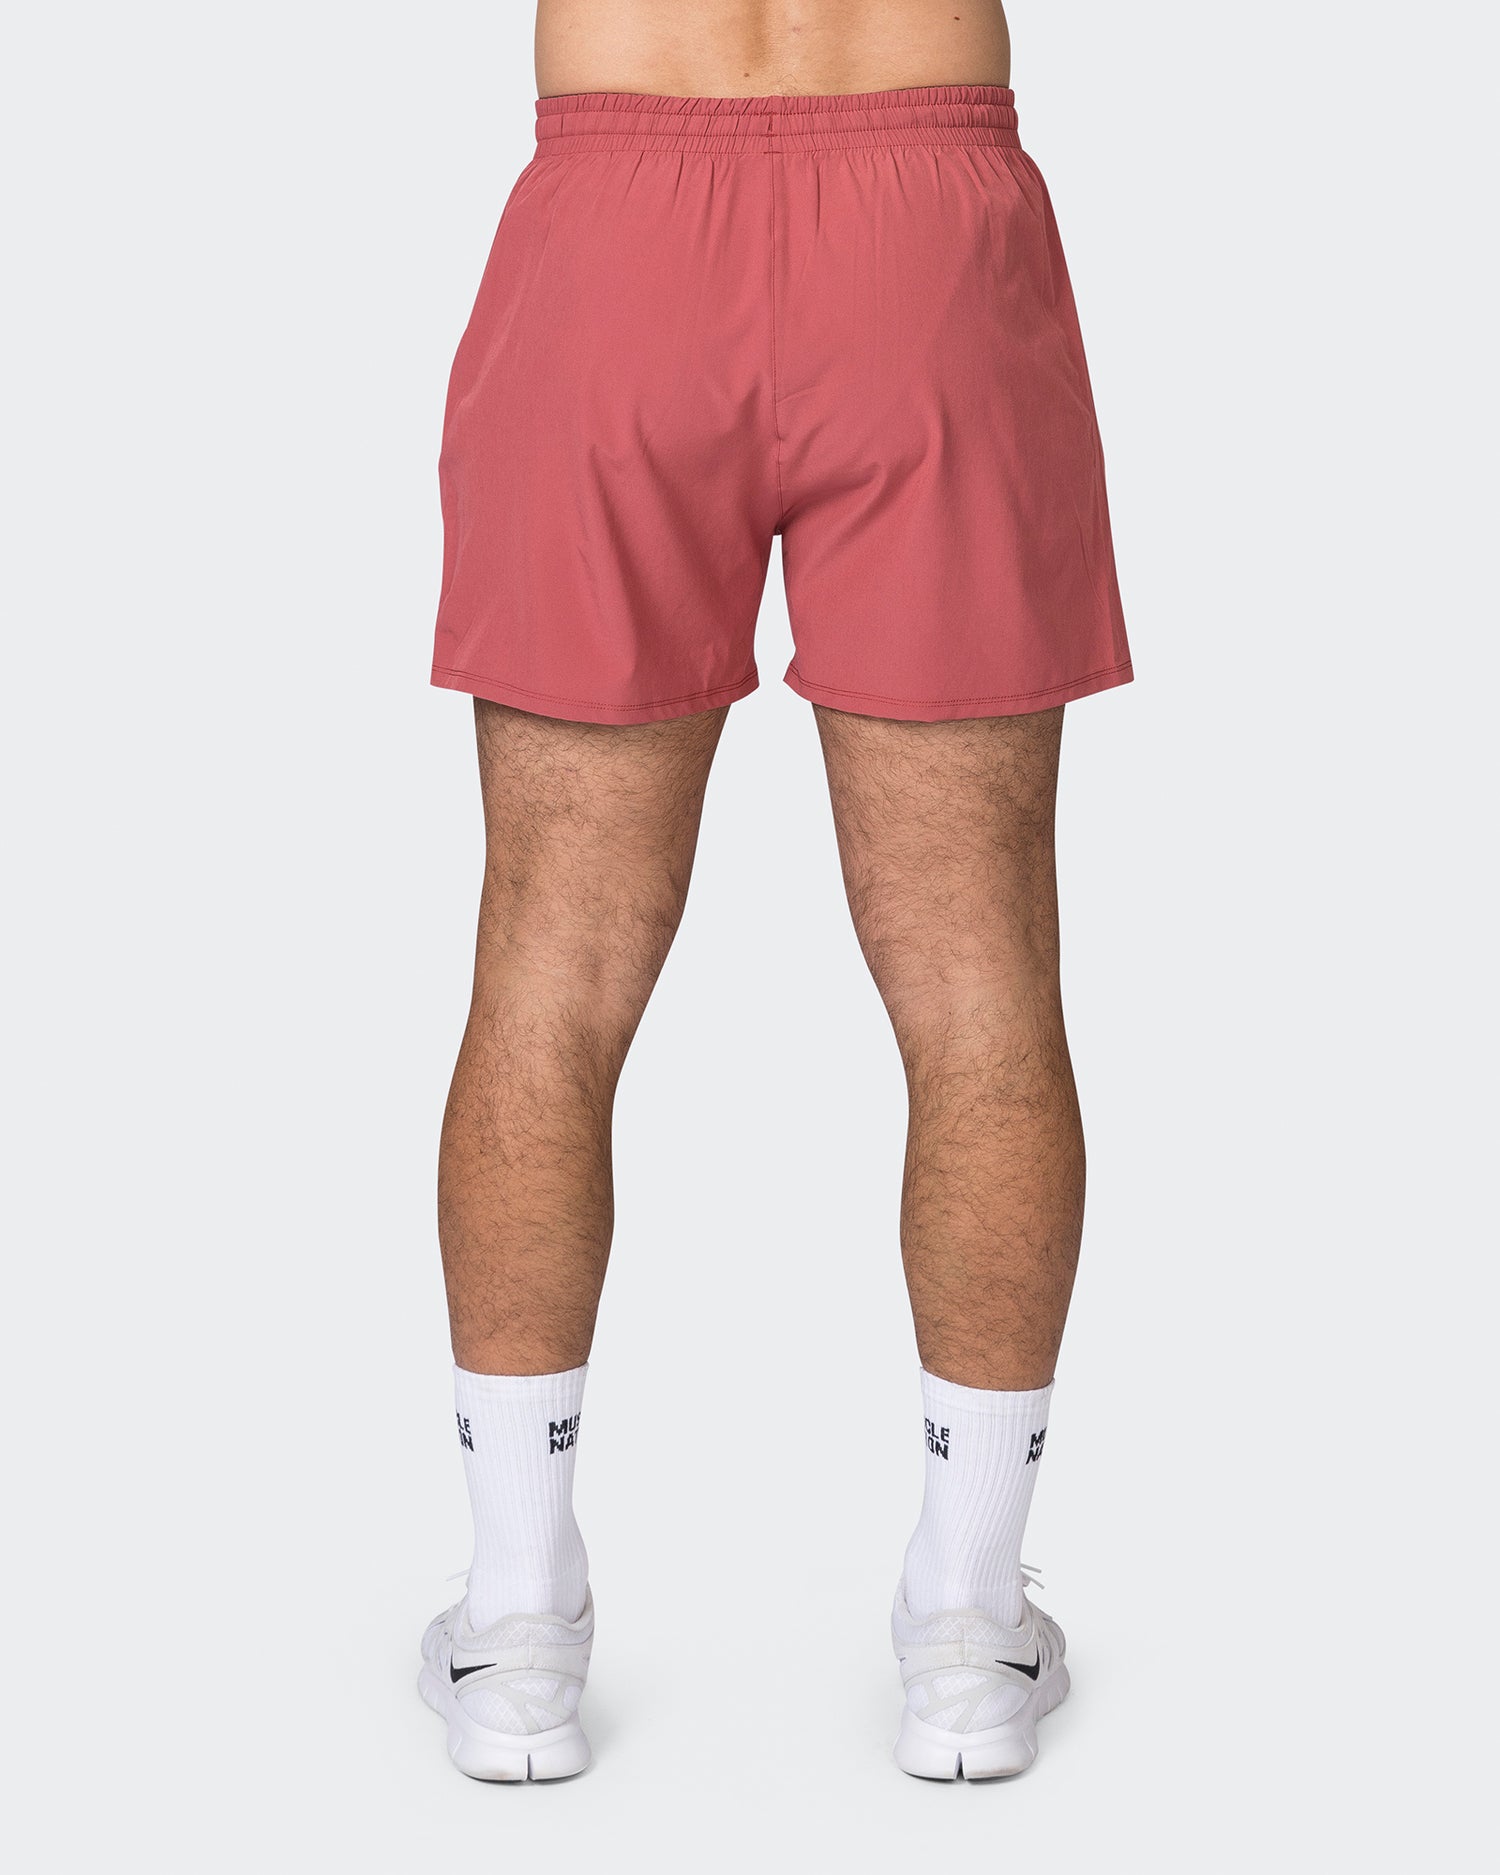 New Heights 4'' Shorts - Dusty Red